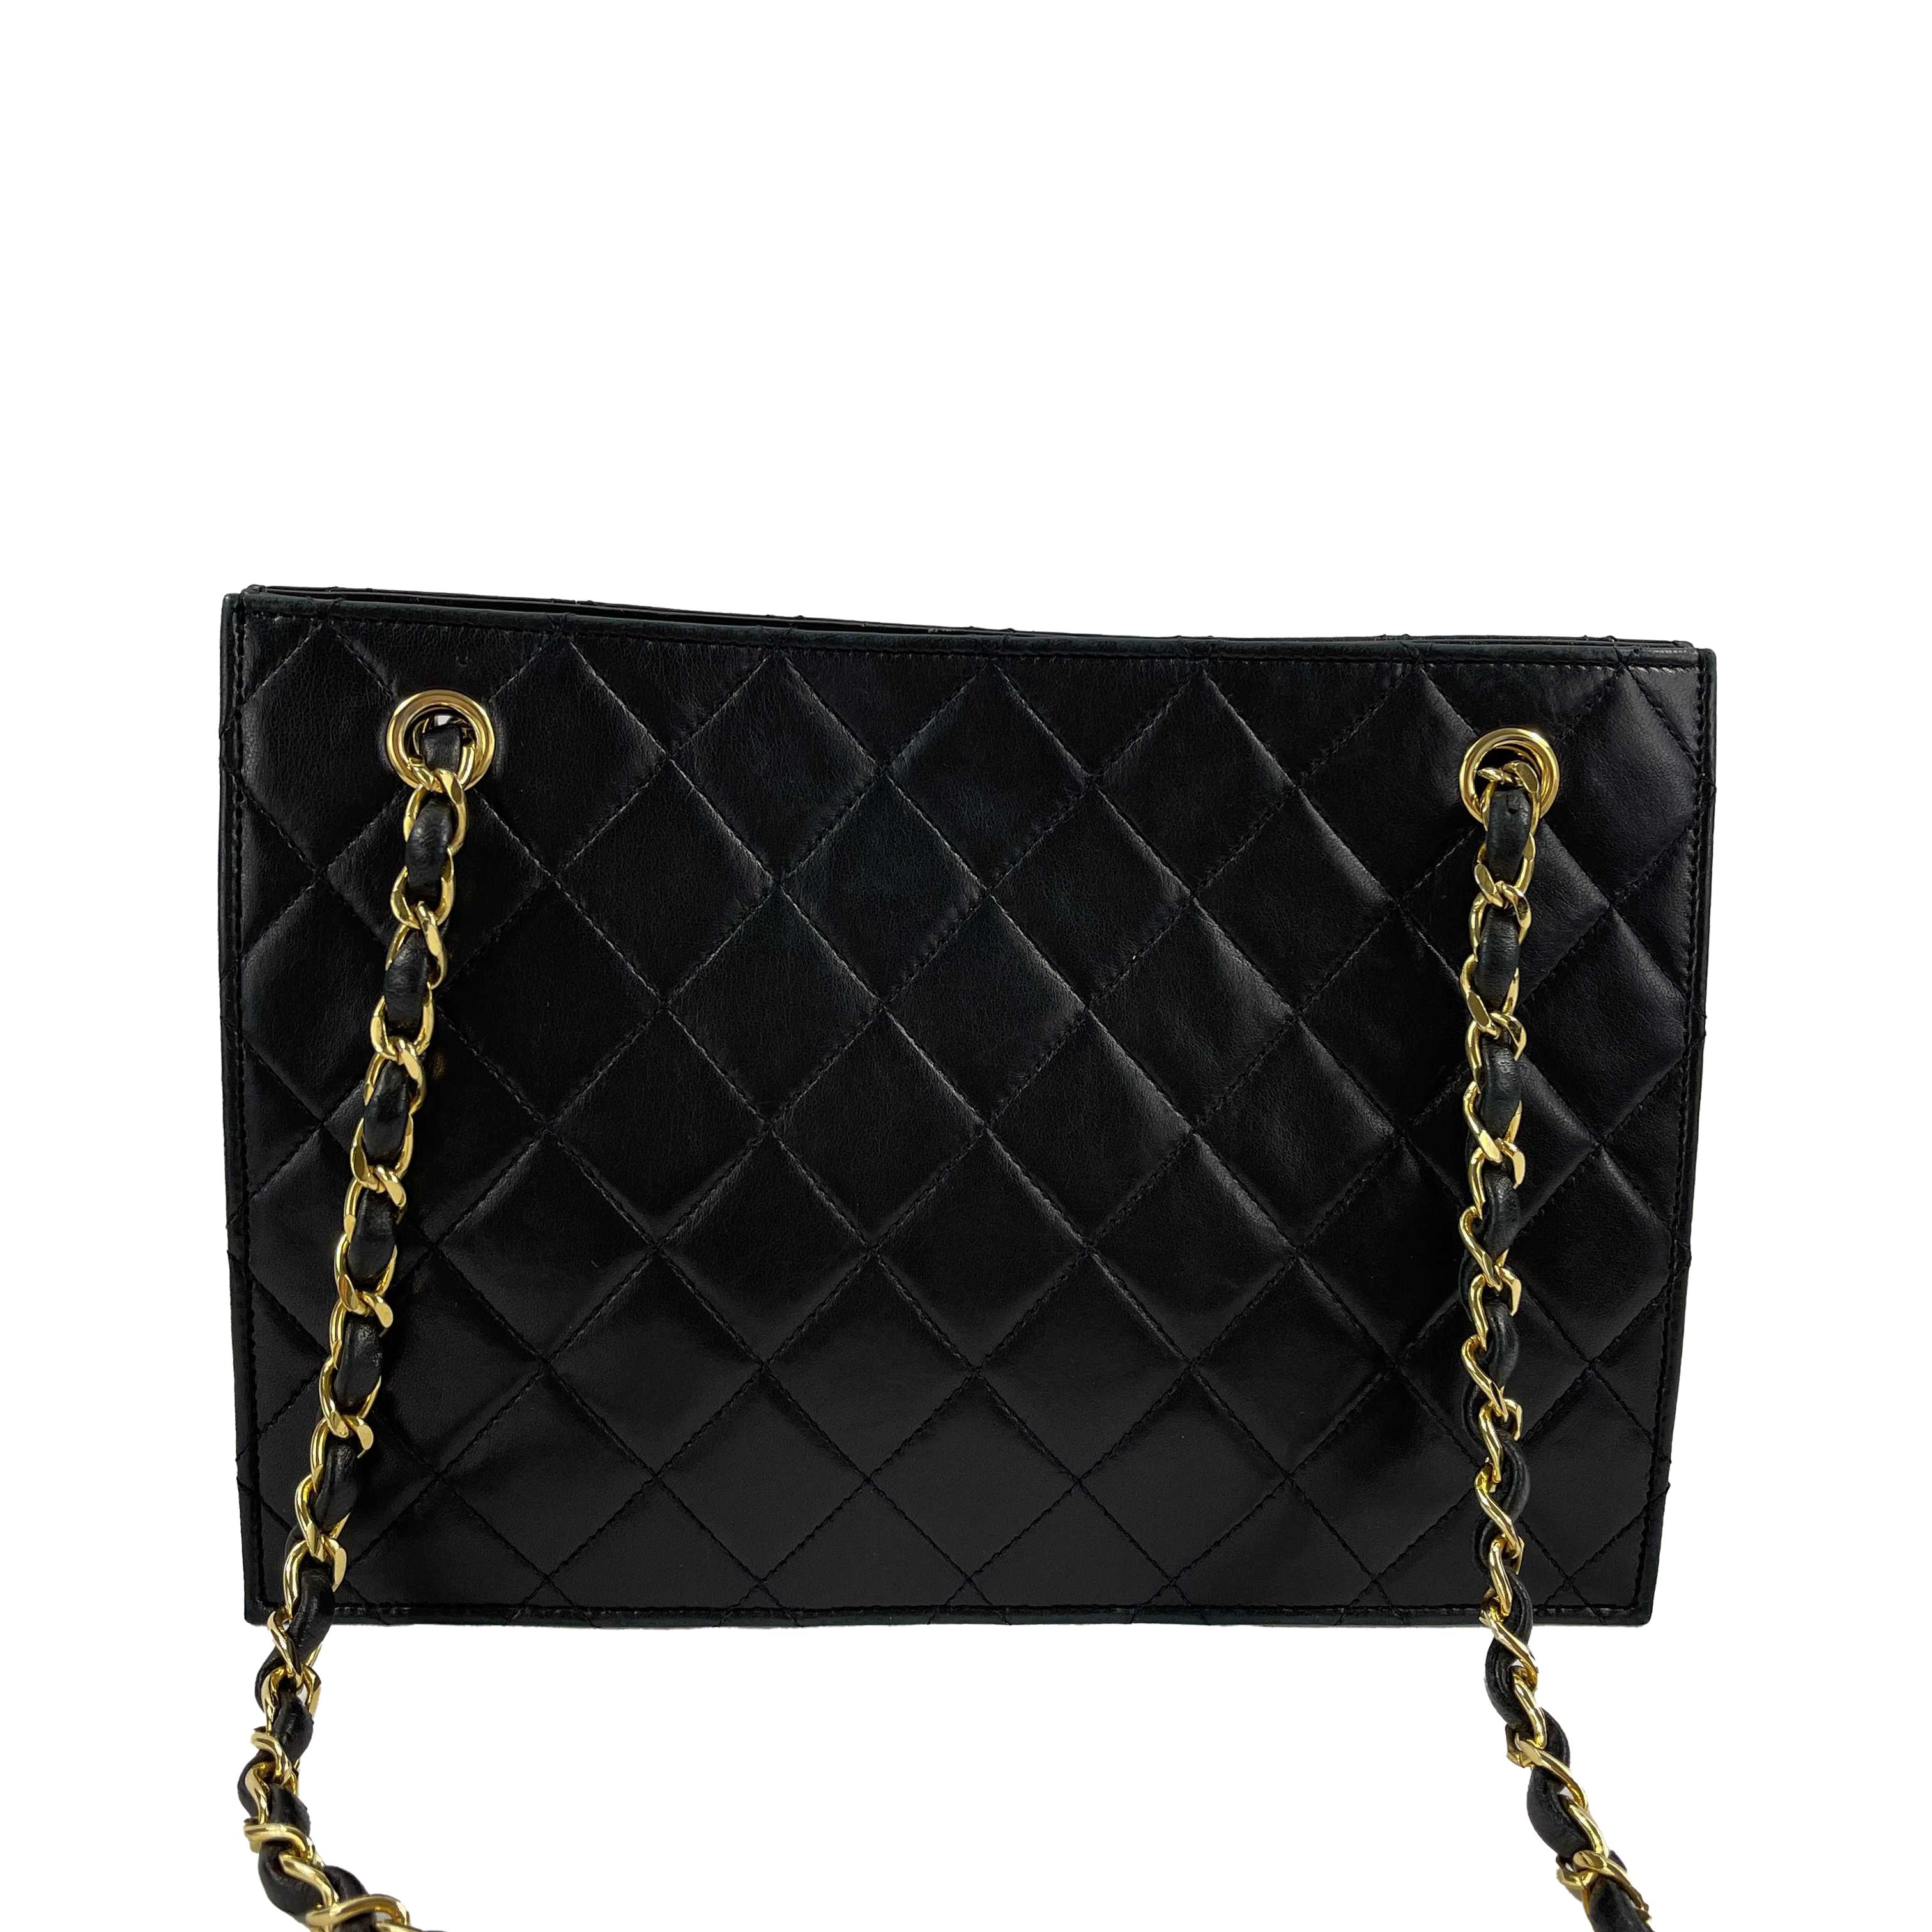 CHANEL - 80S QUILTED BLACK / GOLD CHAIN THREADED SMALL LAMBSKIN CROSSBODY

DESCRIPTION

This vintage early 80s bag is made of supple diamond quilted lambskin leather in black.
Chain link threaded shoulder strap can be worn crossbody.
CC logo at top